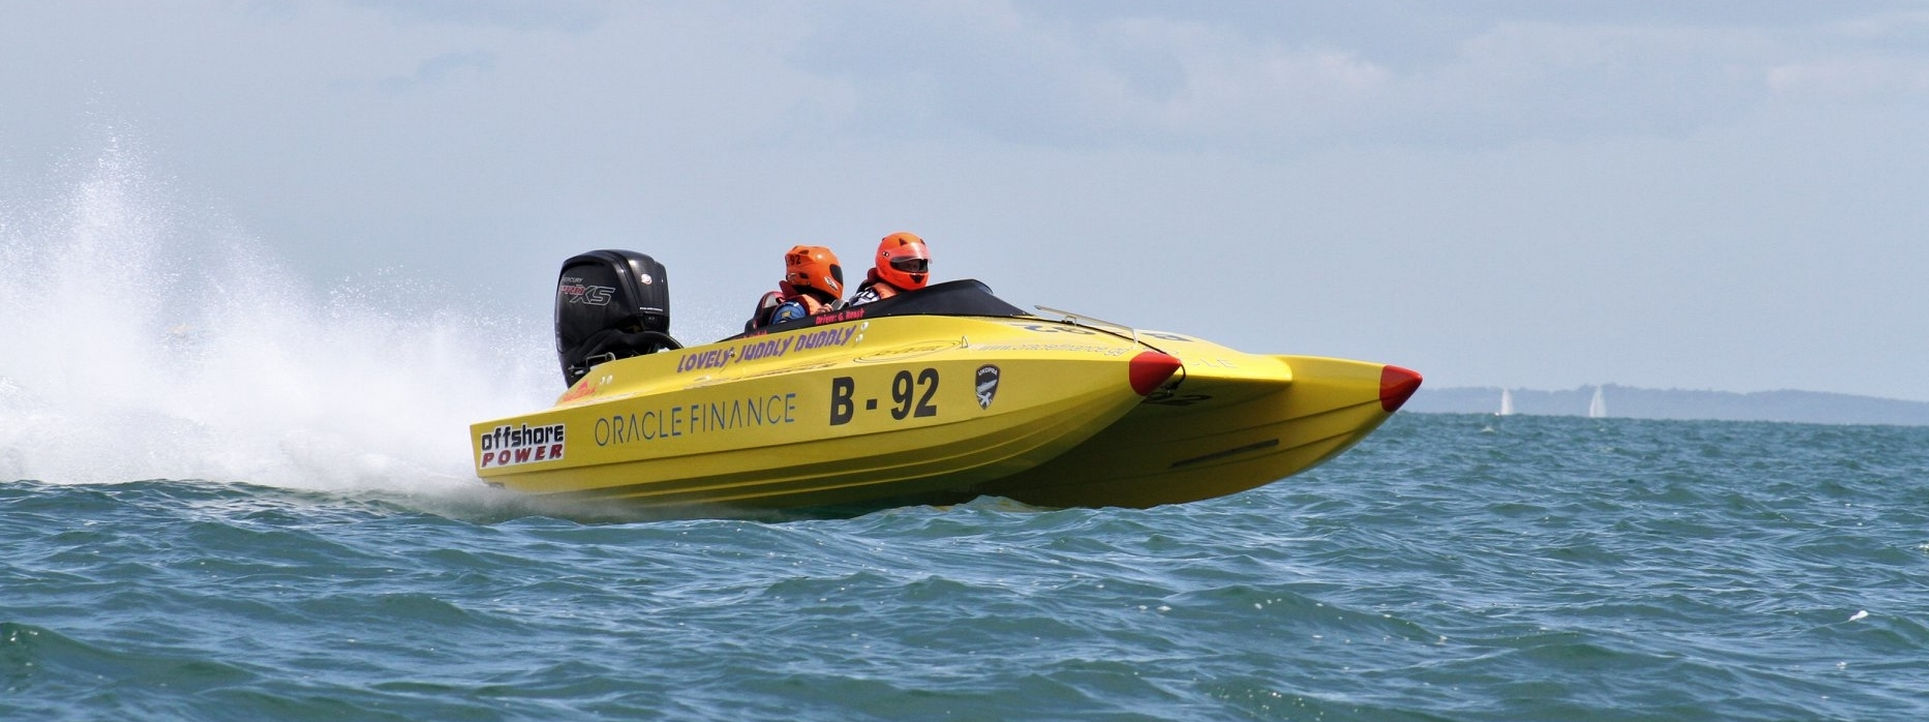 isle of wight powerboat race 3rd june